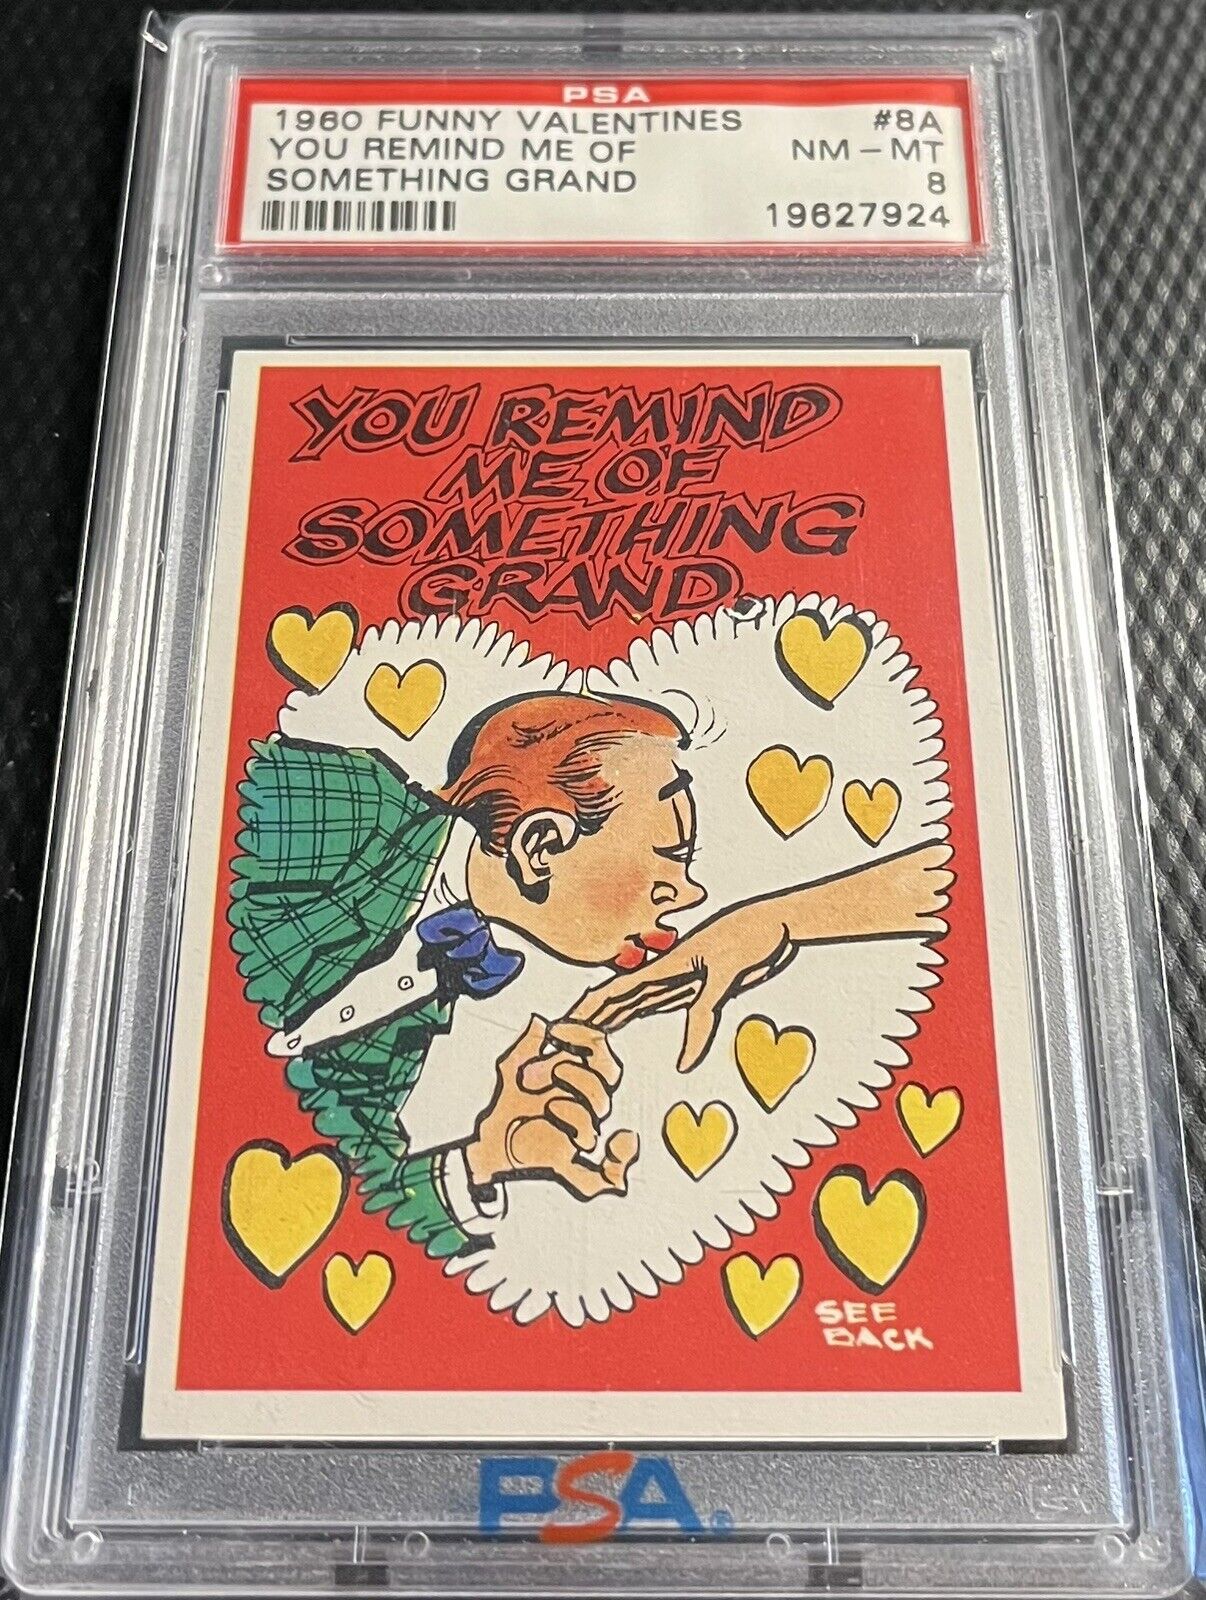 1960 Topps PSA 8 Vintage Funny Valentines #8A Graded NM-MT - Clean Holder